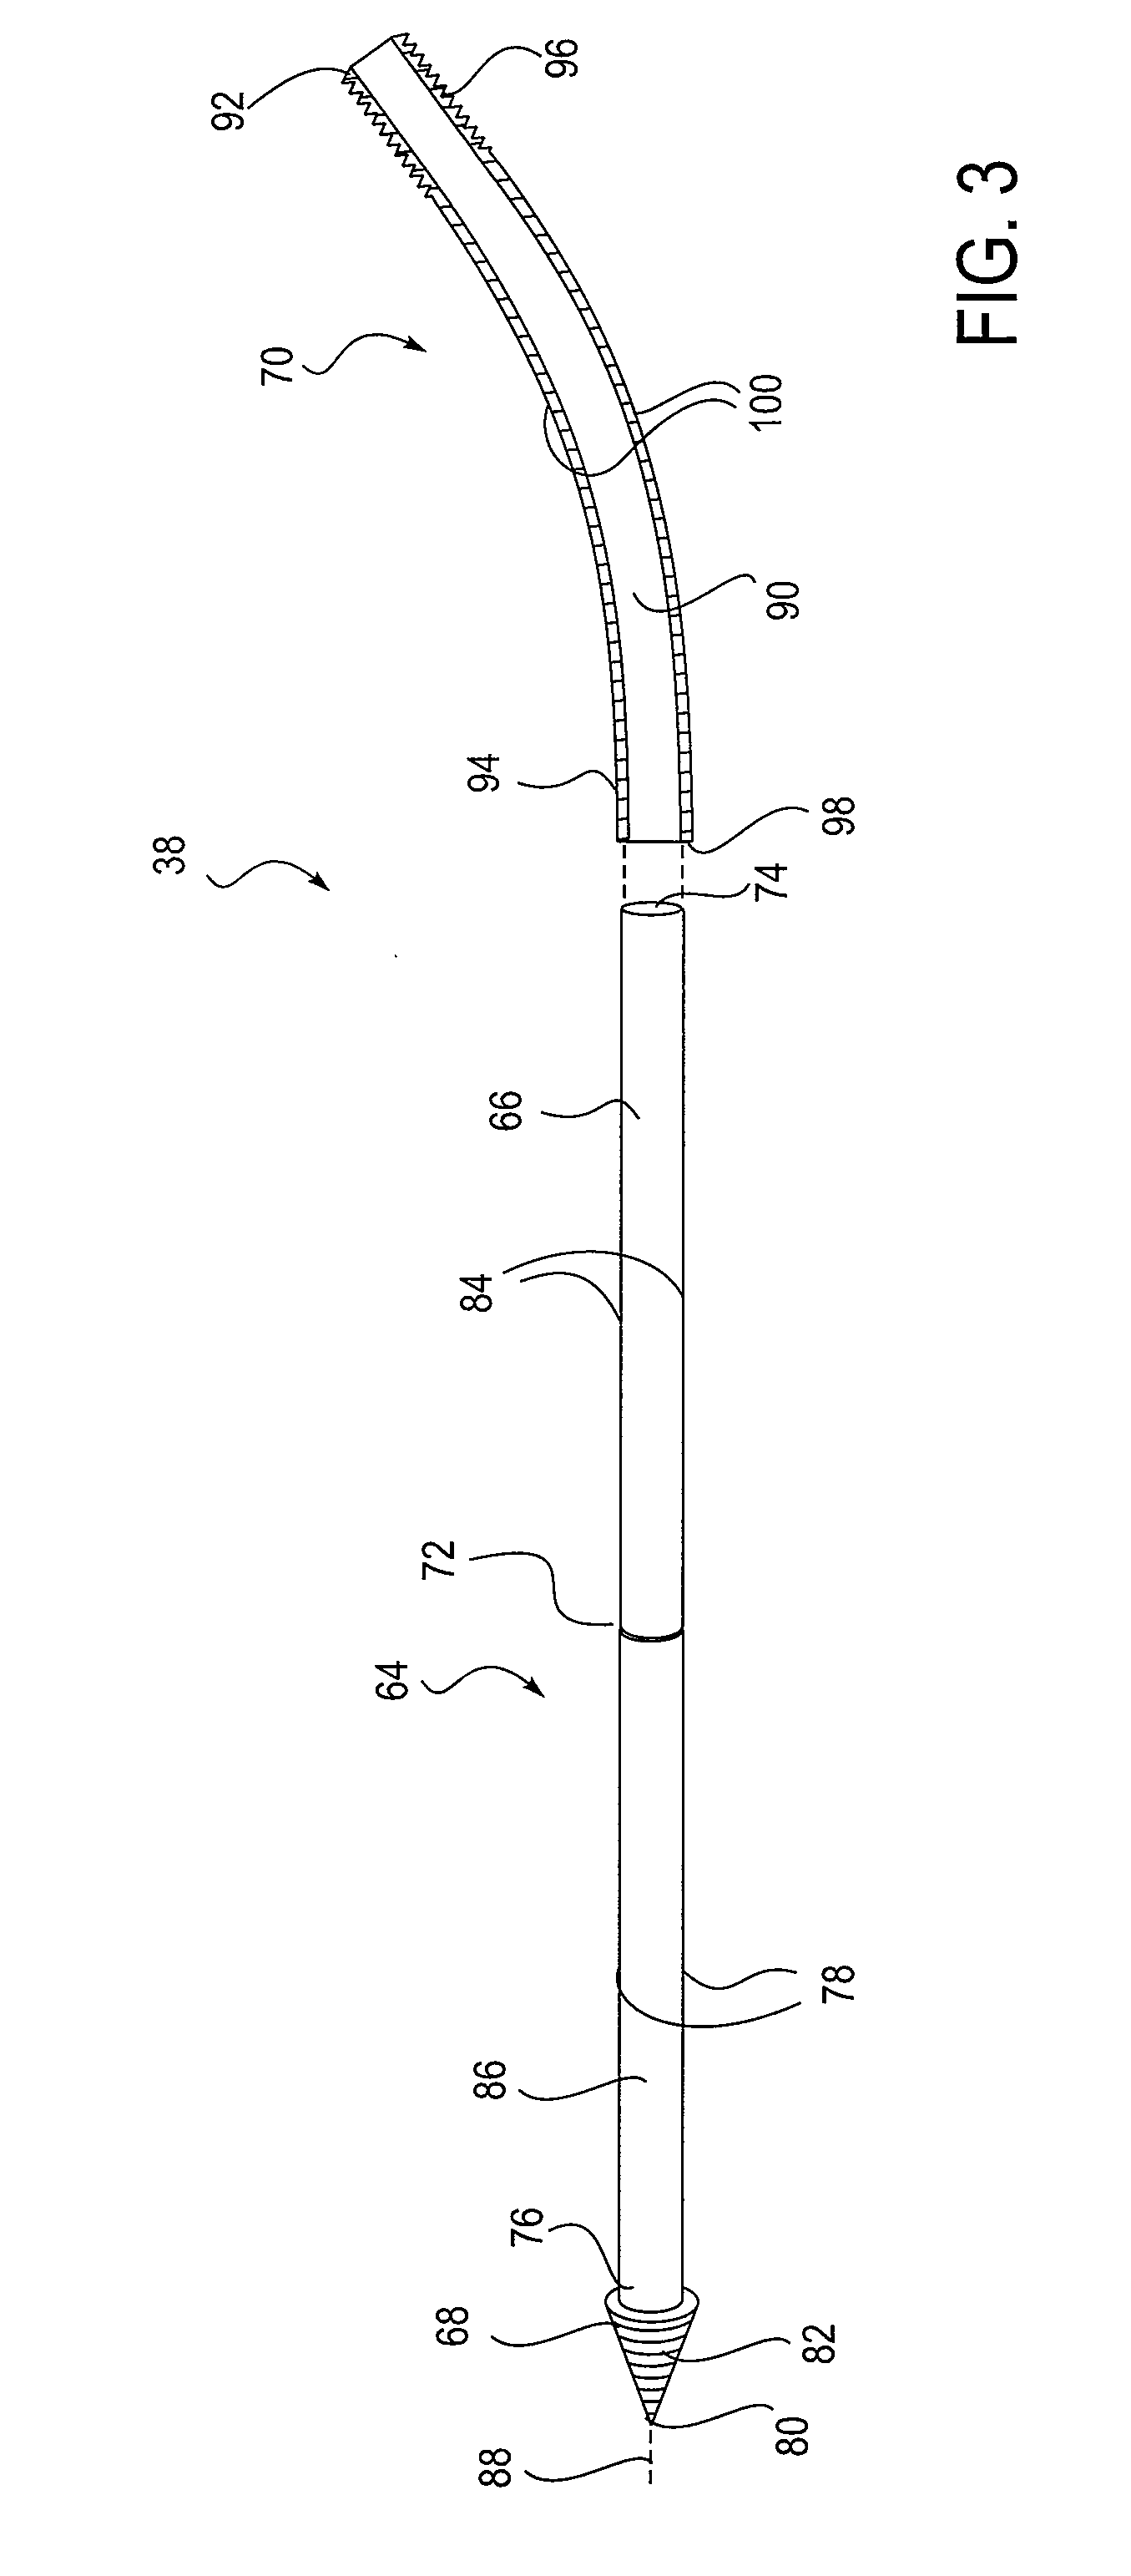 Posterior spinal fastener and method for using same